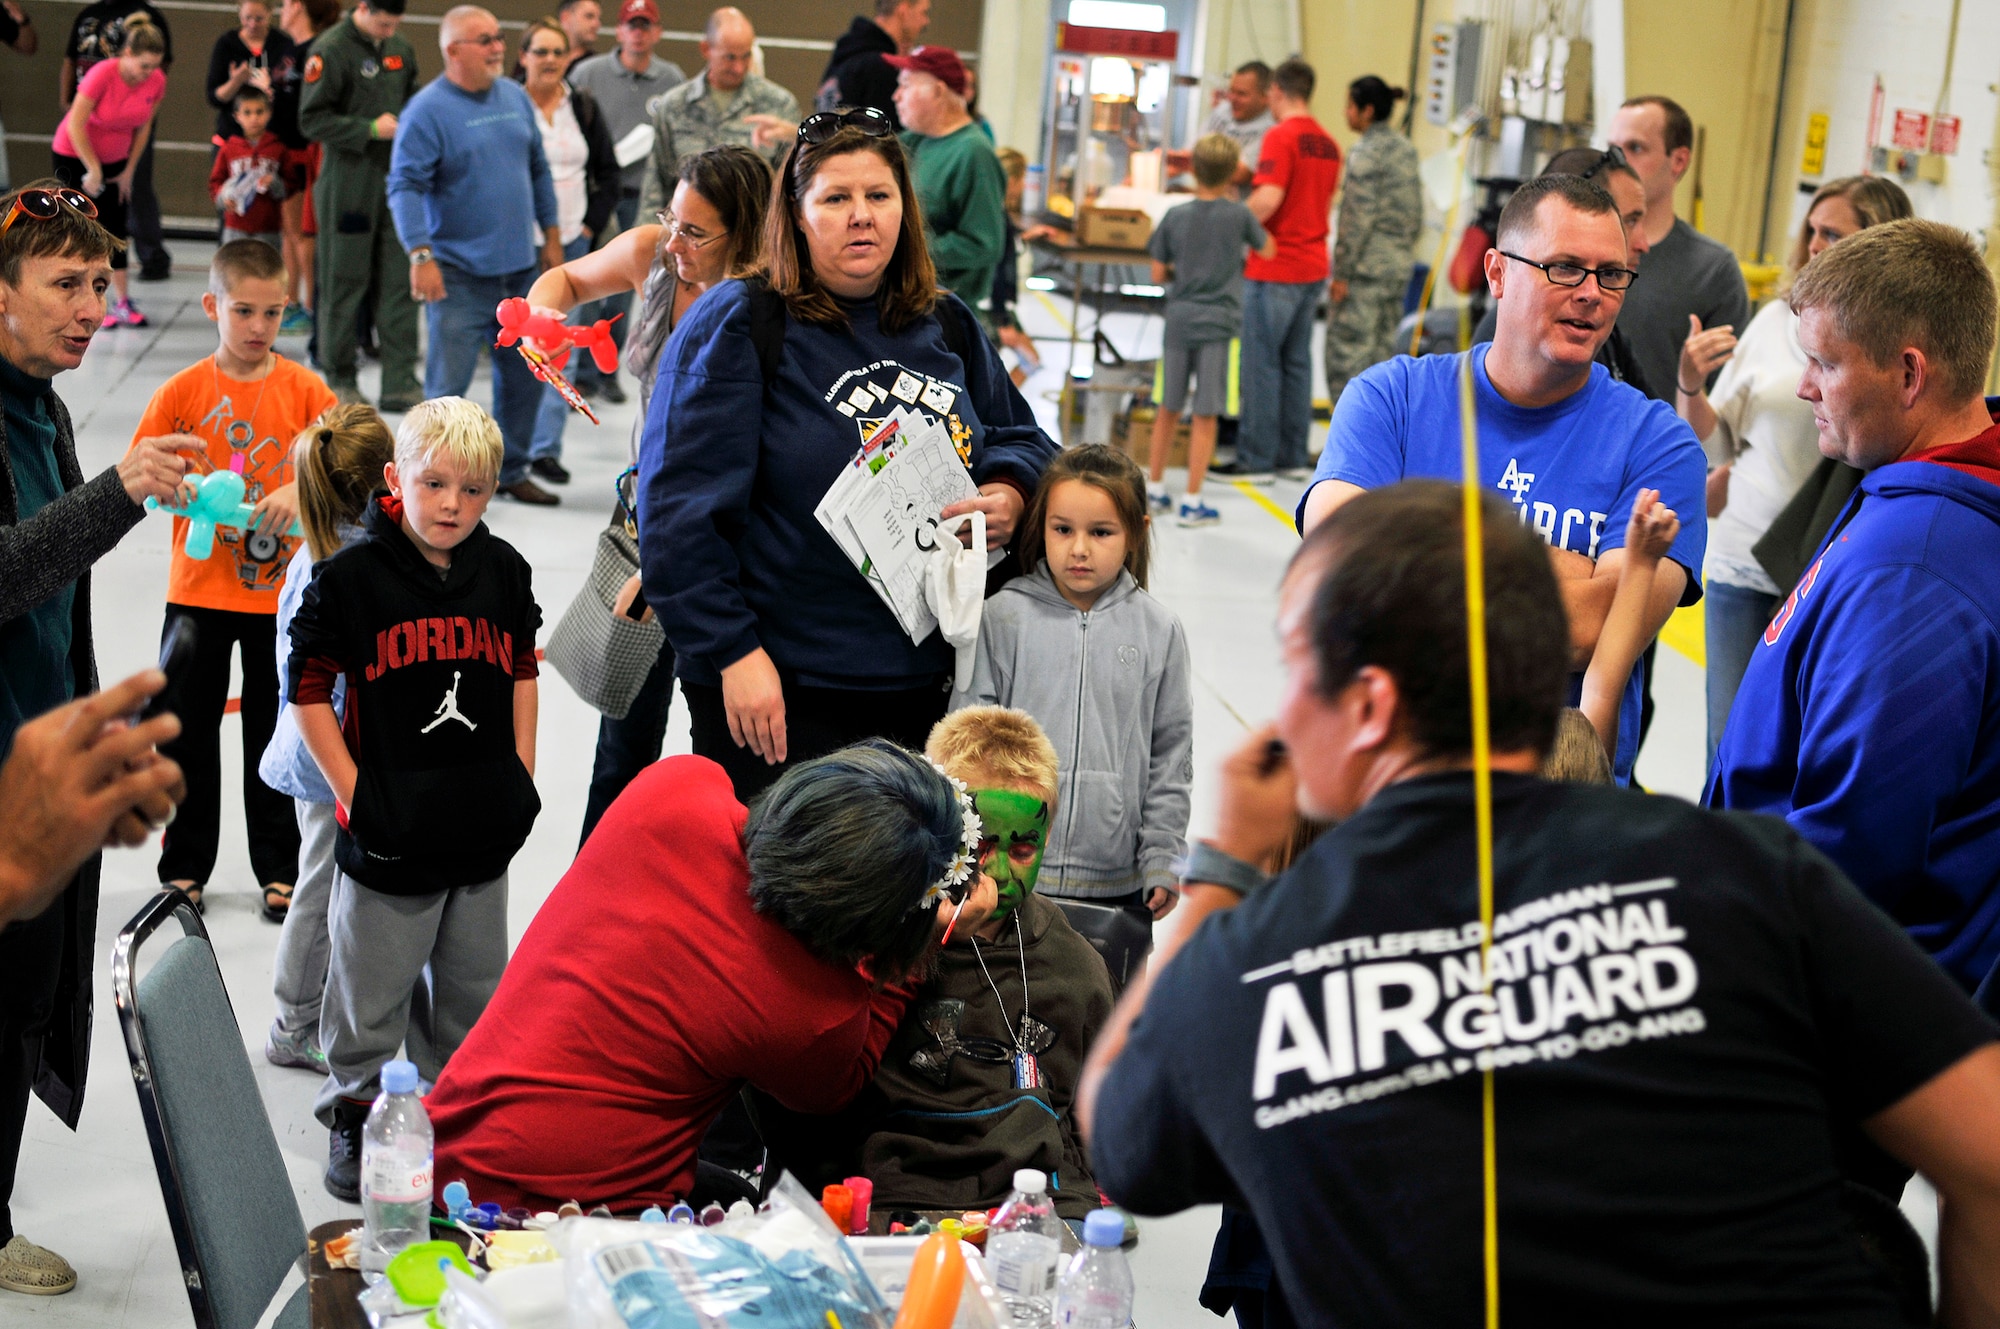 Friends, family and unit members of the 182nd Airlift Wing, Illinois Air National Guard, partake in popcorn, face painting and balloon animals during Wingman and Family Day at the 182nd Airlift Wing, Peoria, Ill., Sept. 12, 2015. The event was organized to promote resiliency in Airmen and their friends and family. (U.S. Air National Guard photo by Staff Sgt. Lealan Buehrer/Released)